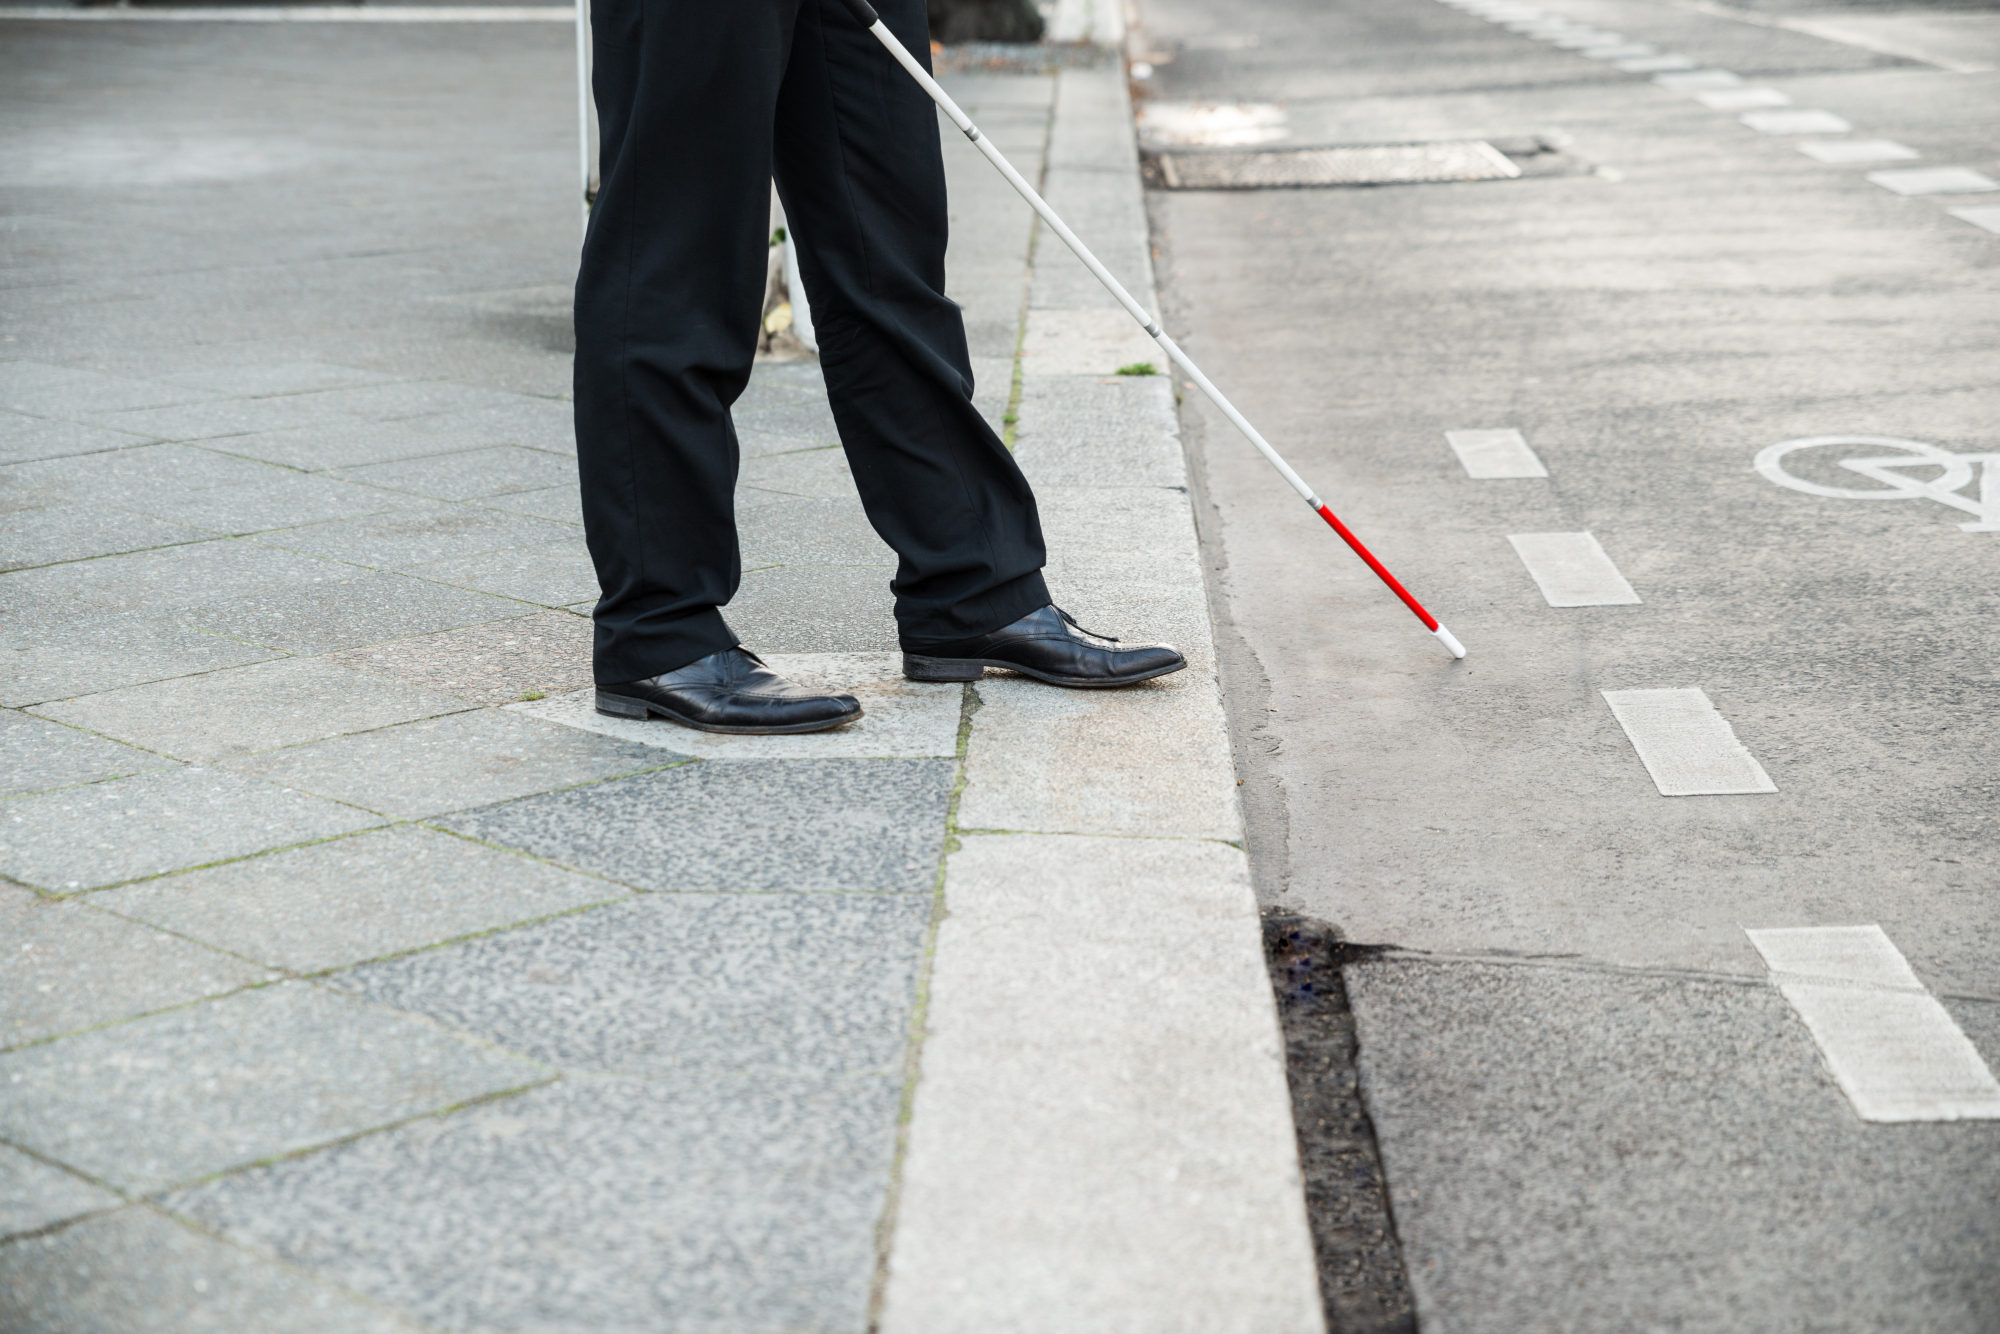 What is a white cane? Council of the Blind asking community to help make  Wyoming streets safer - Cheyenne, WY Cap City News